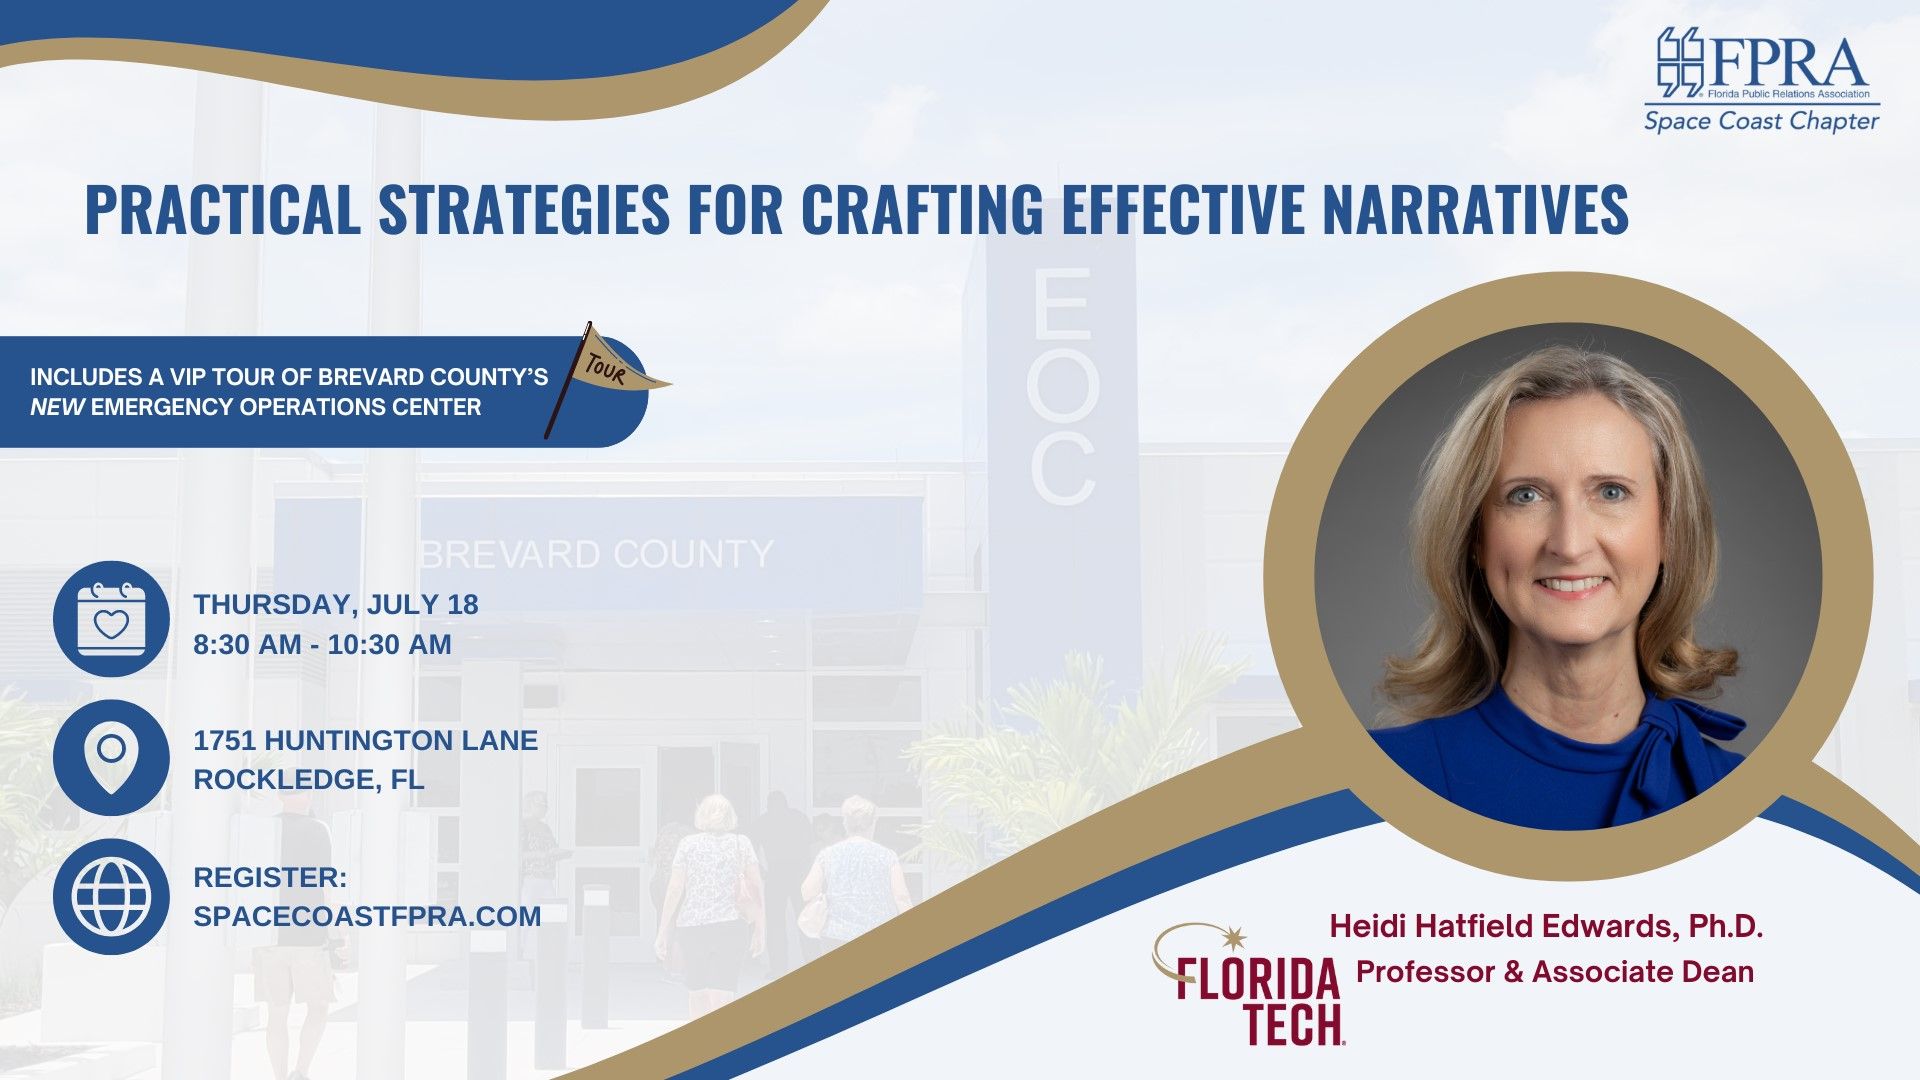 Space Coast Chapter presents Practical Strategies for Crafting Effective Narratives @ Brevard County Emergency Operations Center in Rockledge